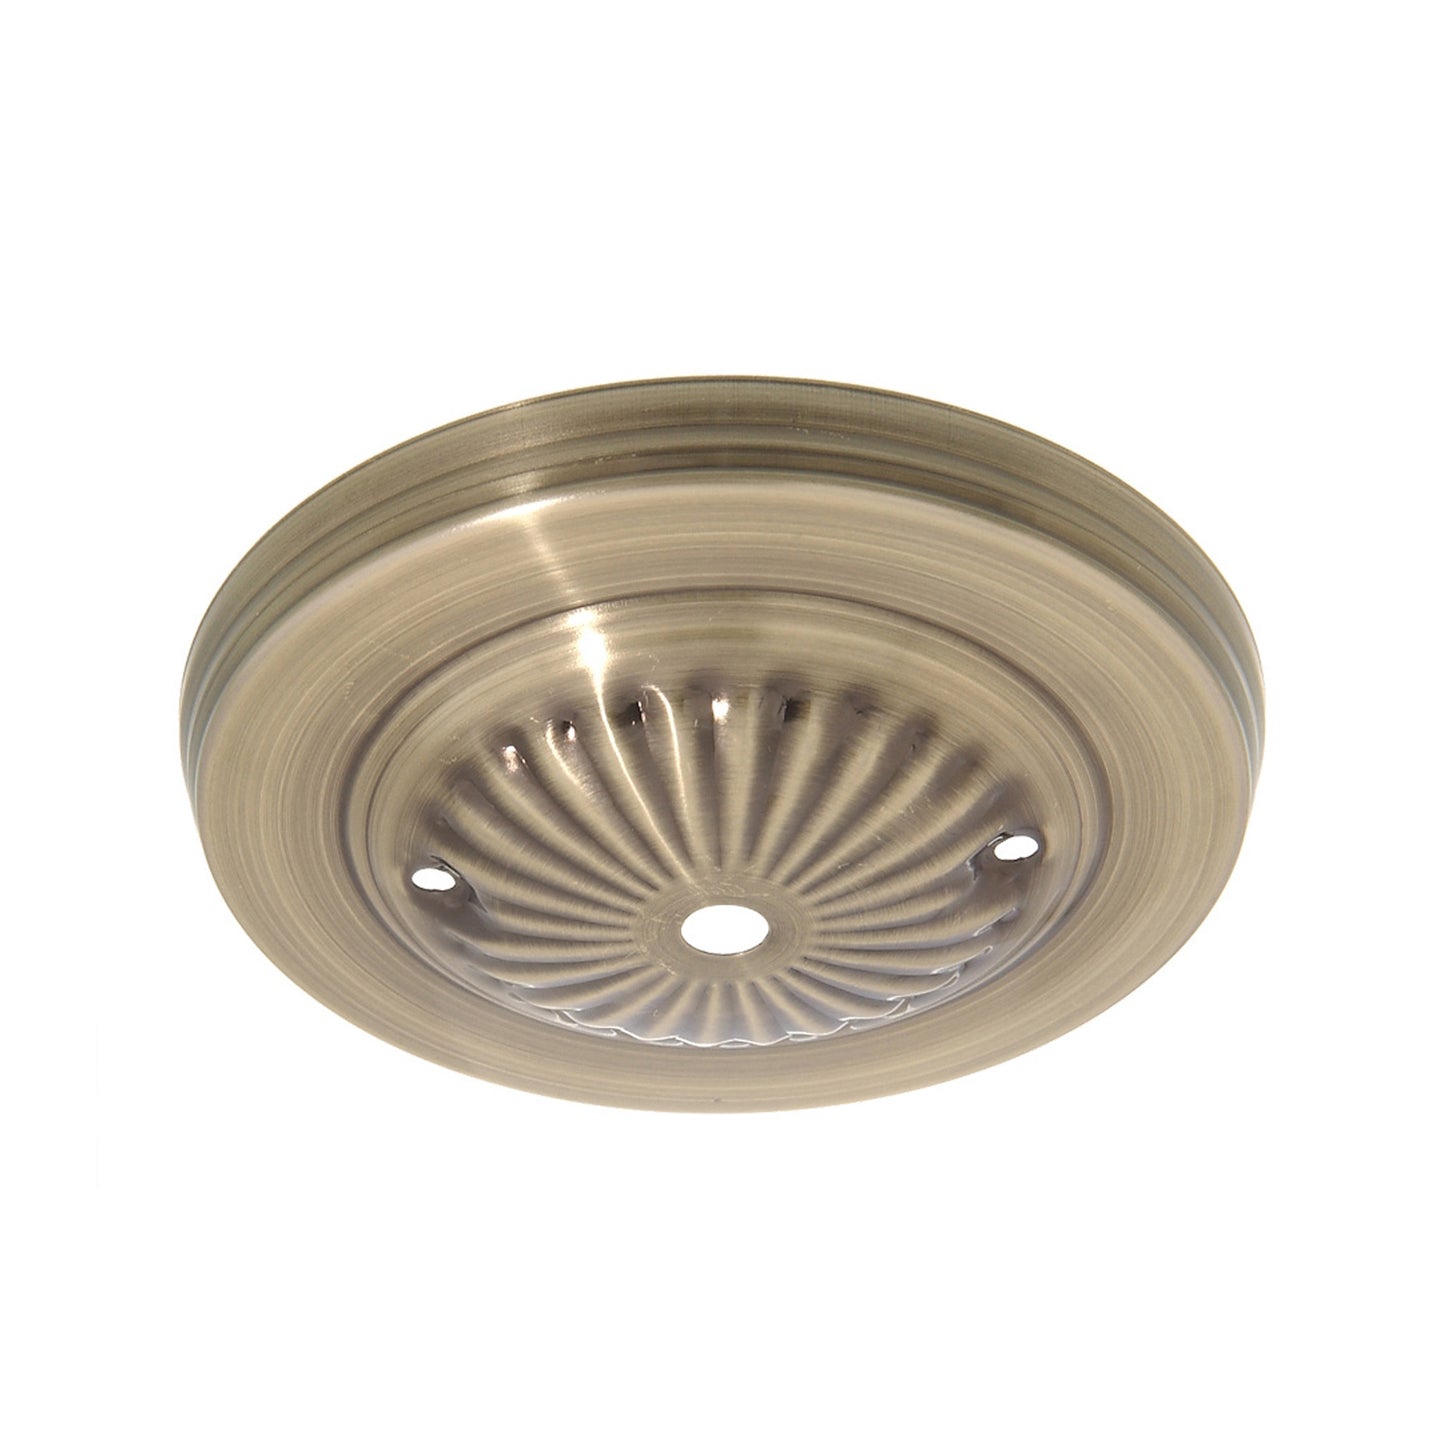 Solid Brass Canopy with Rosette Design, 5 1/4" dia. (10806)